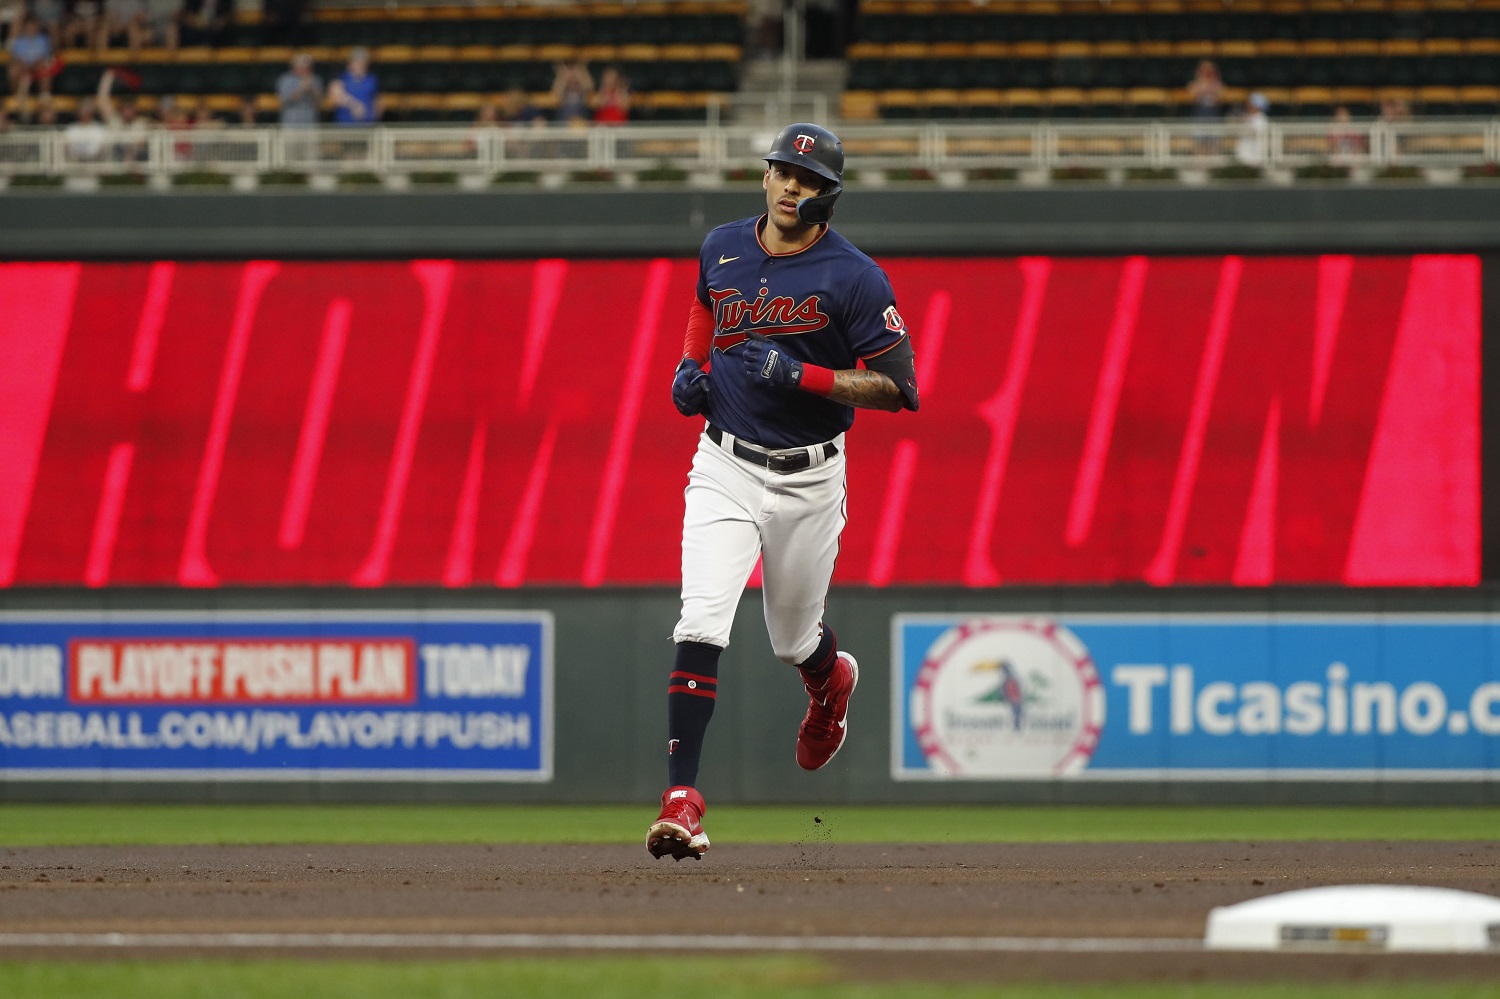 Carlos Correa's walk-off homer caps Twins' rally past Brewers for 7-5 win